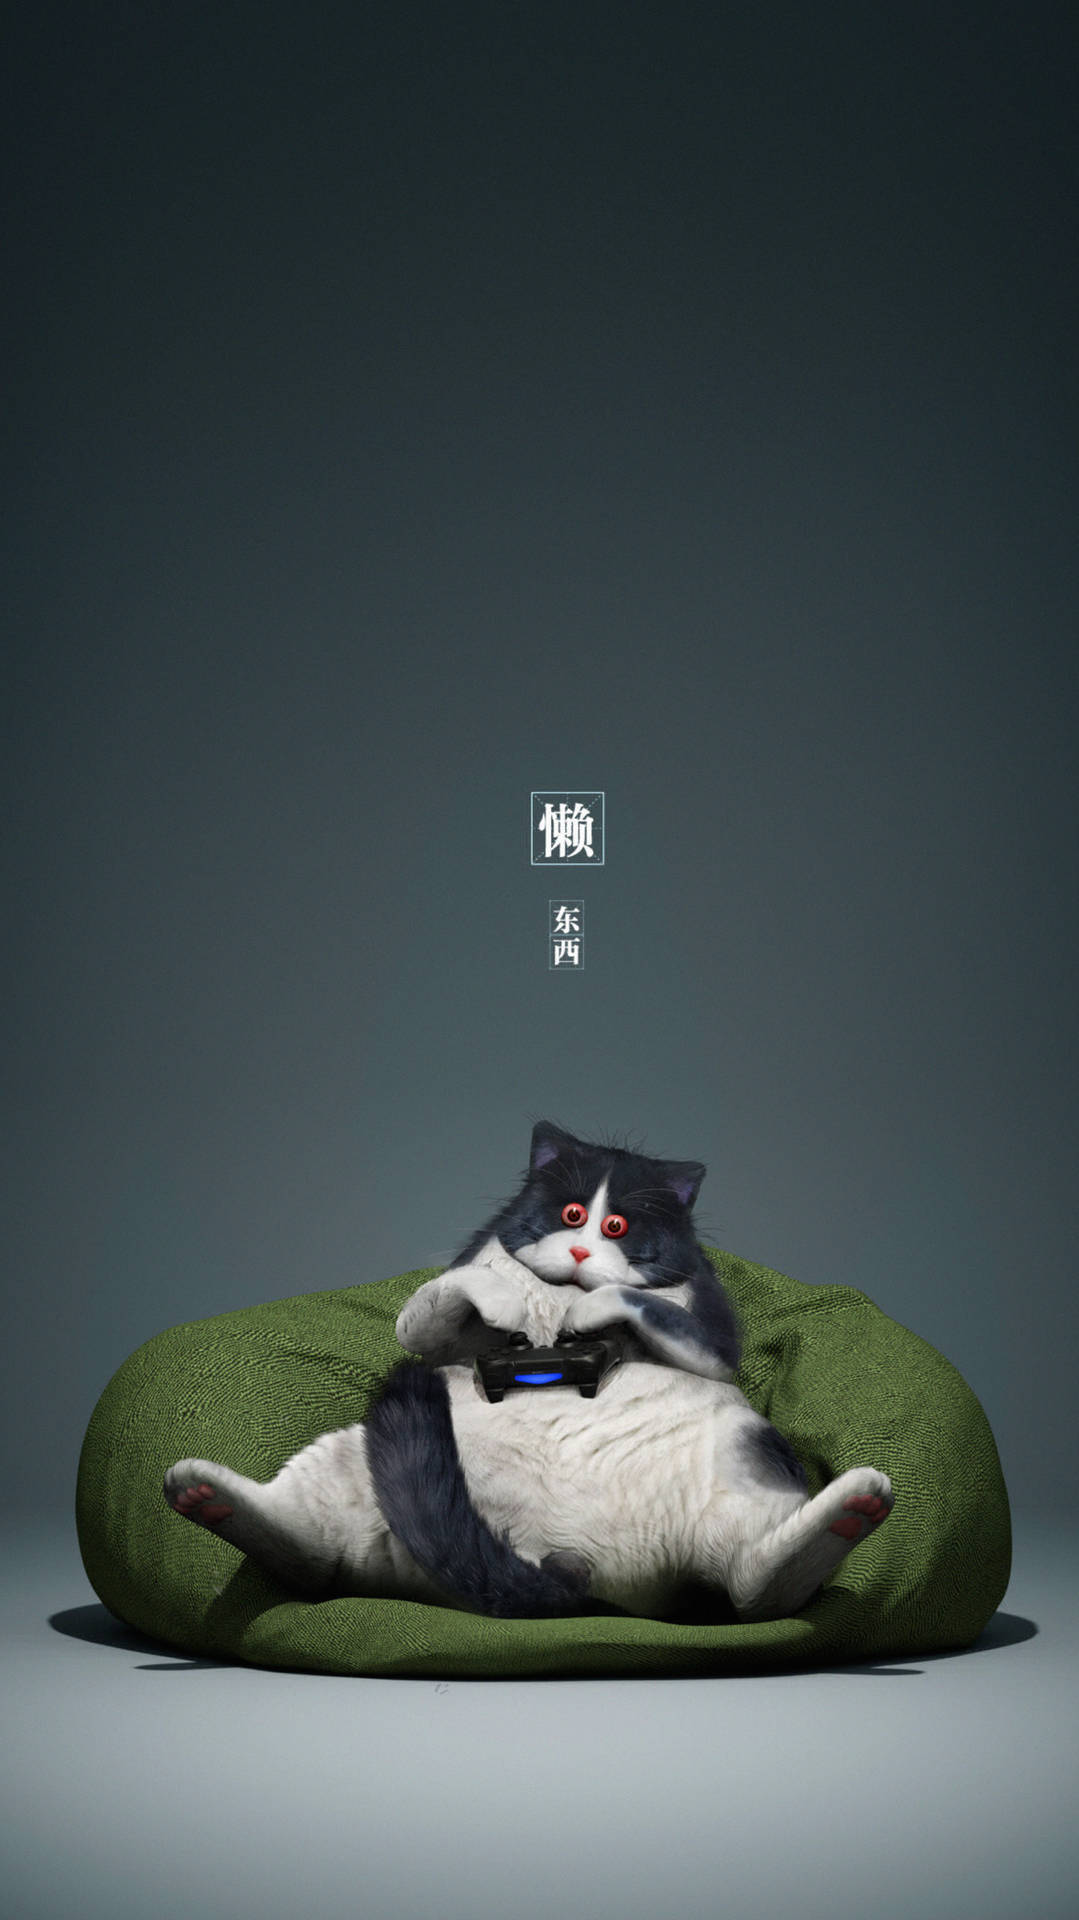 This Cool Cat Is Feeling Lazy Wallpaper